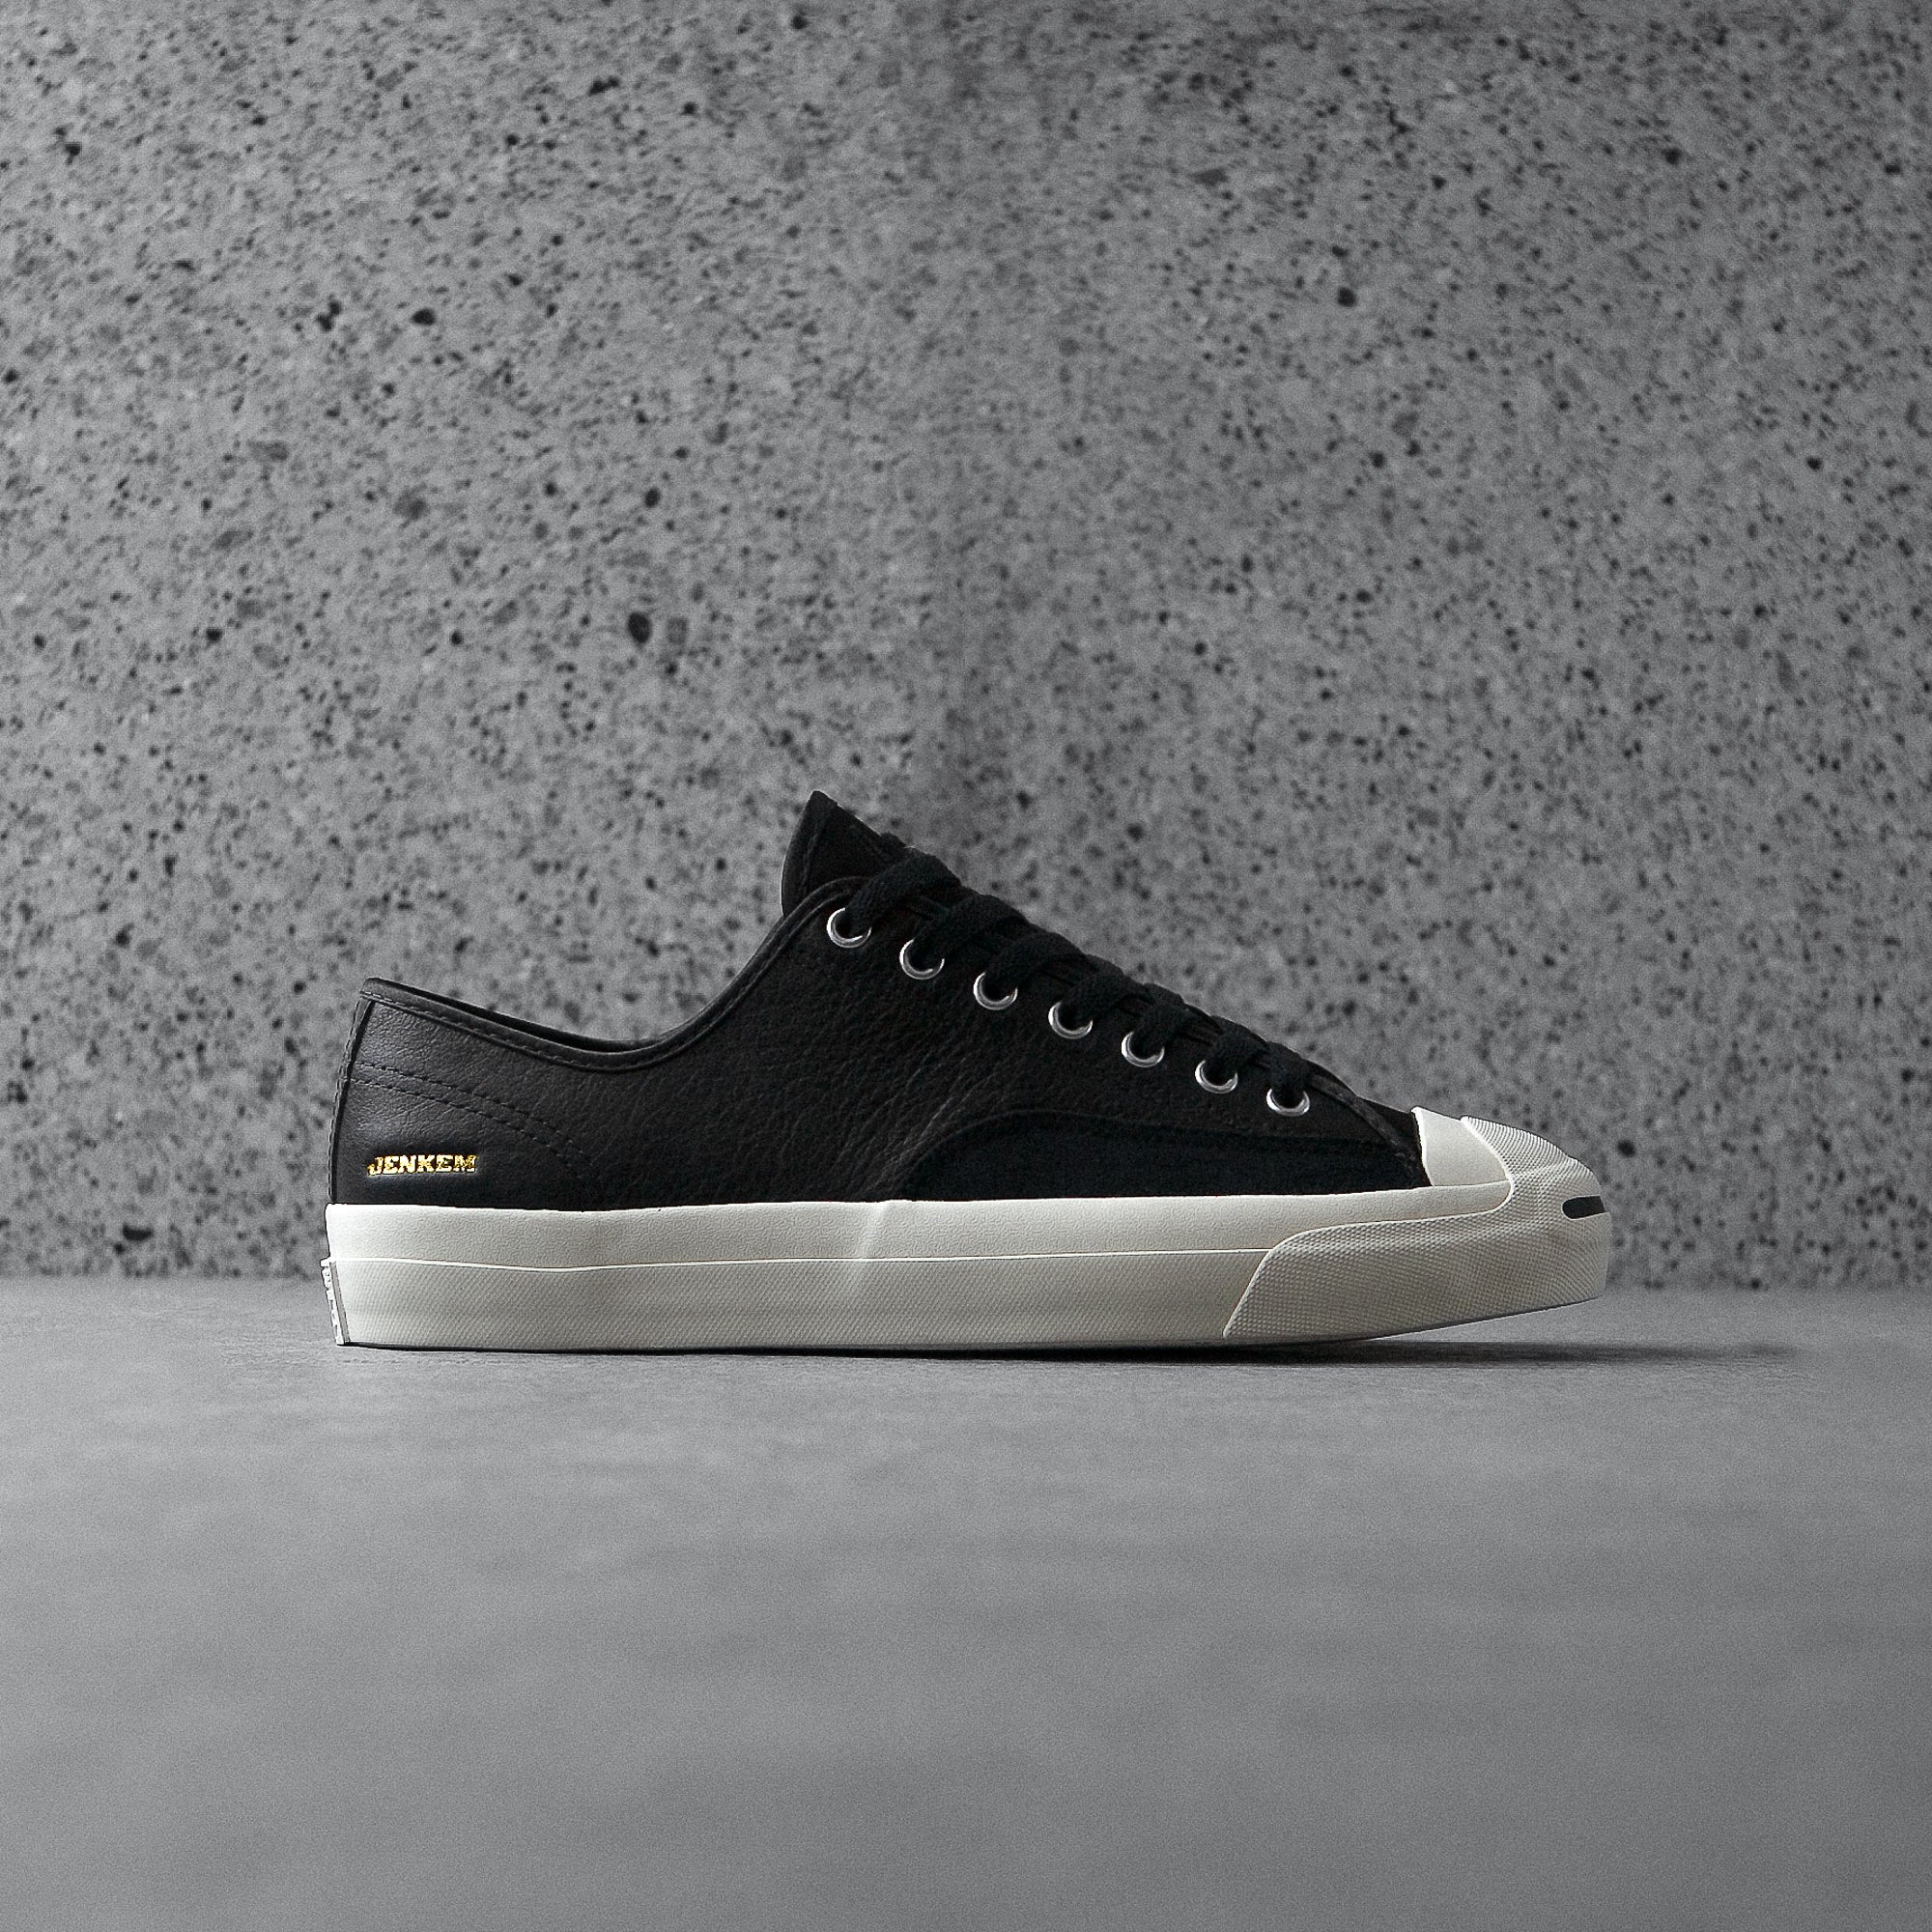 converse jack purcell pro ox